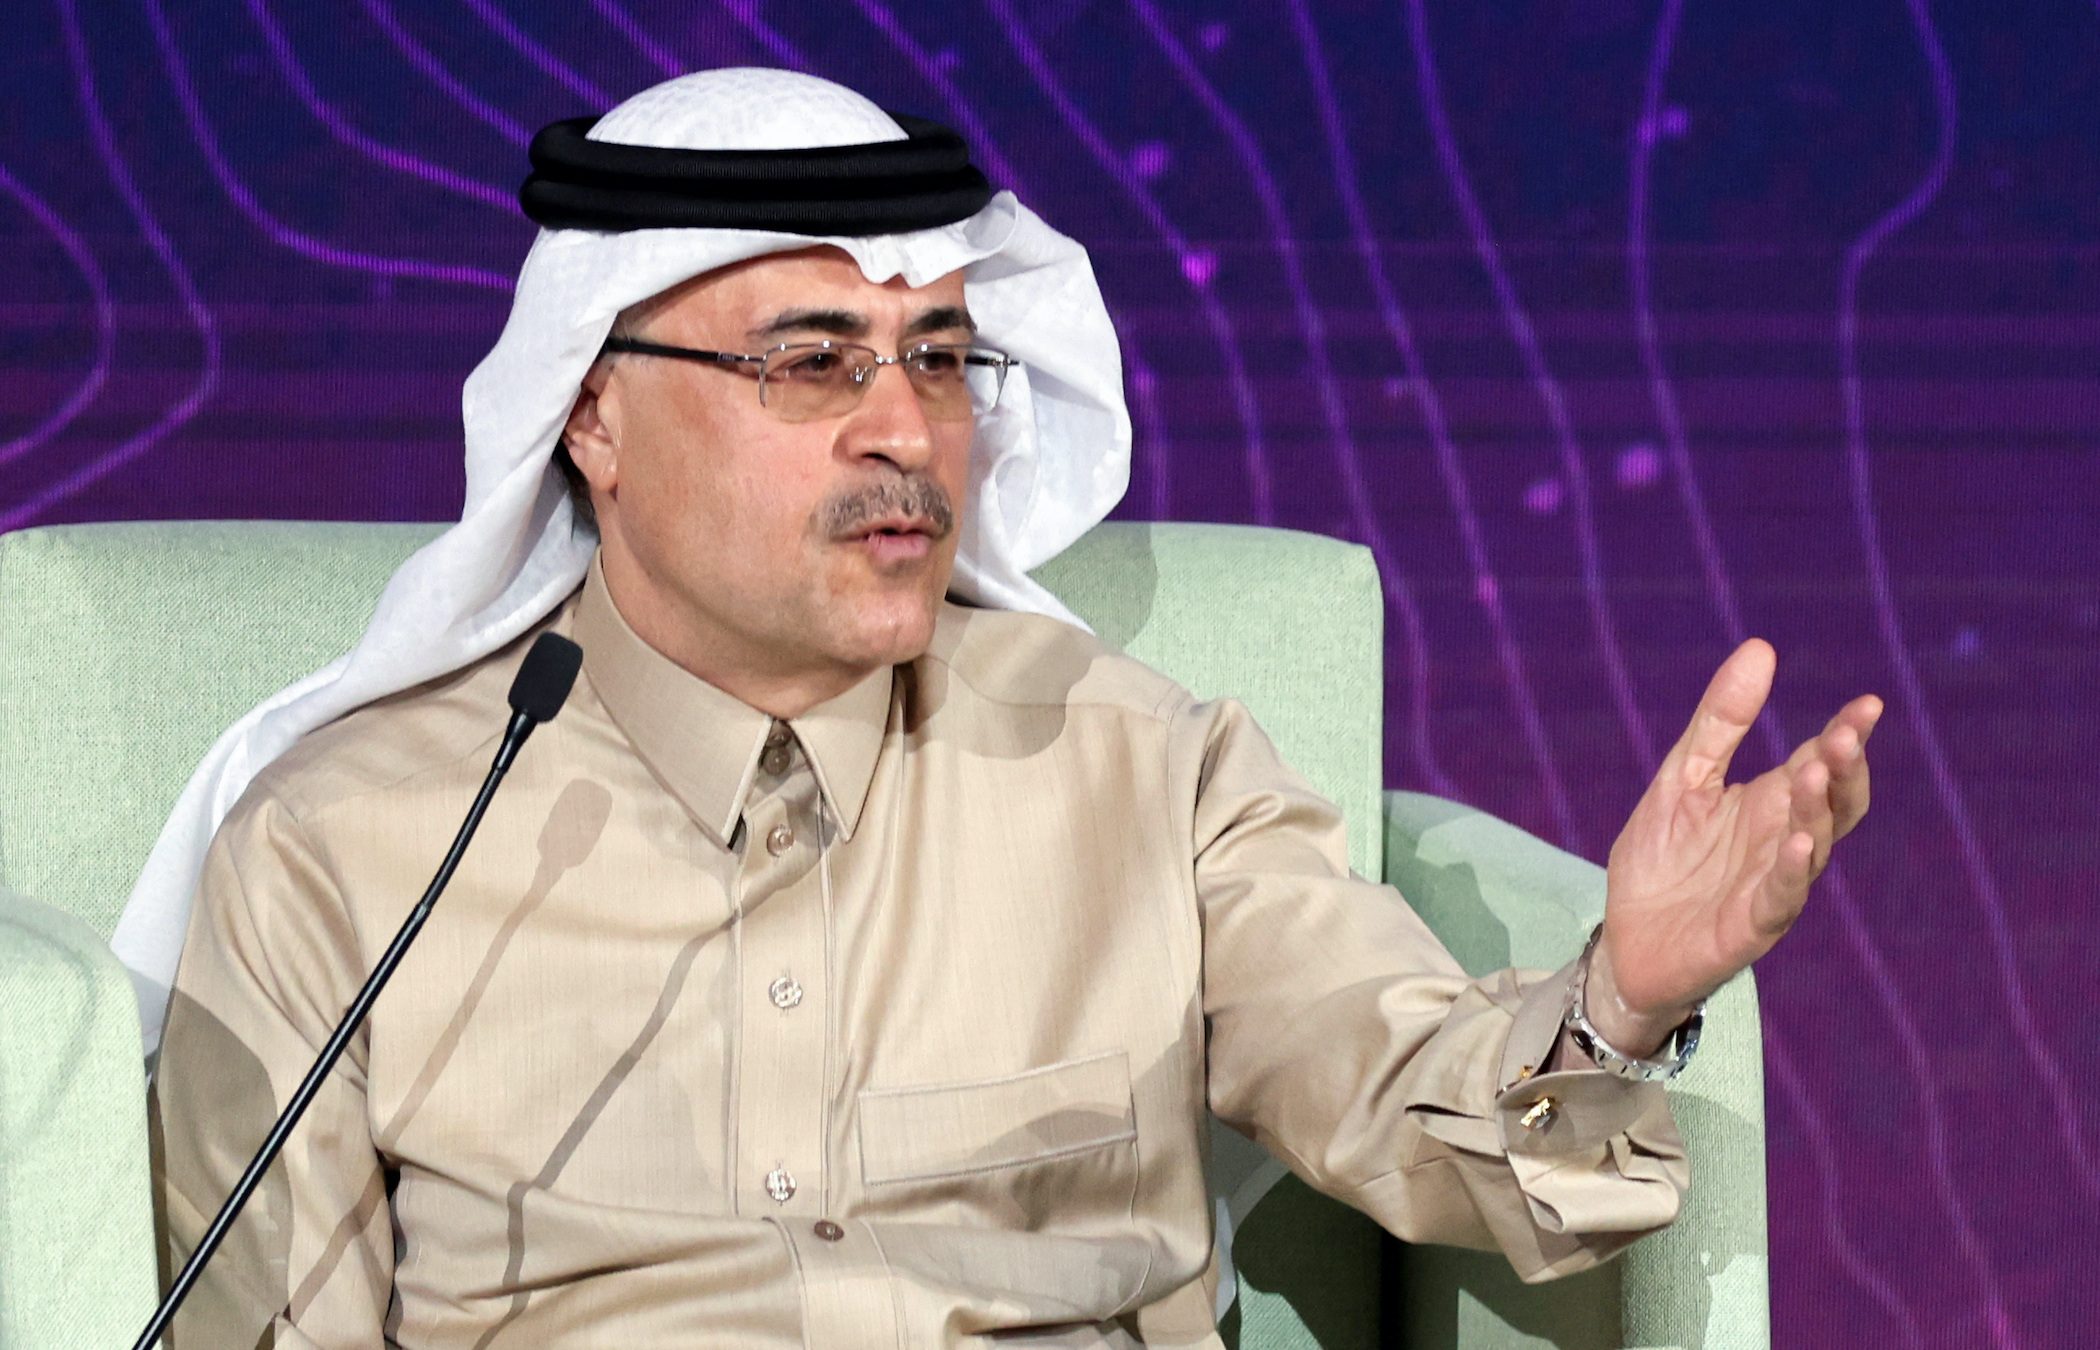 Saudi Aramco’s Amin Nasser: A homegrown engineer who reached the top